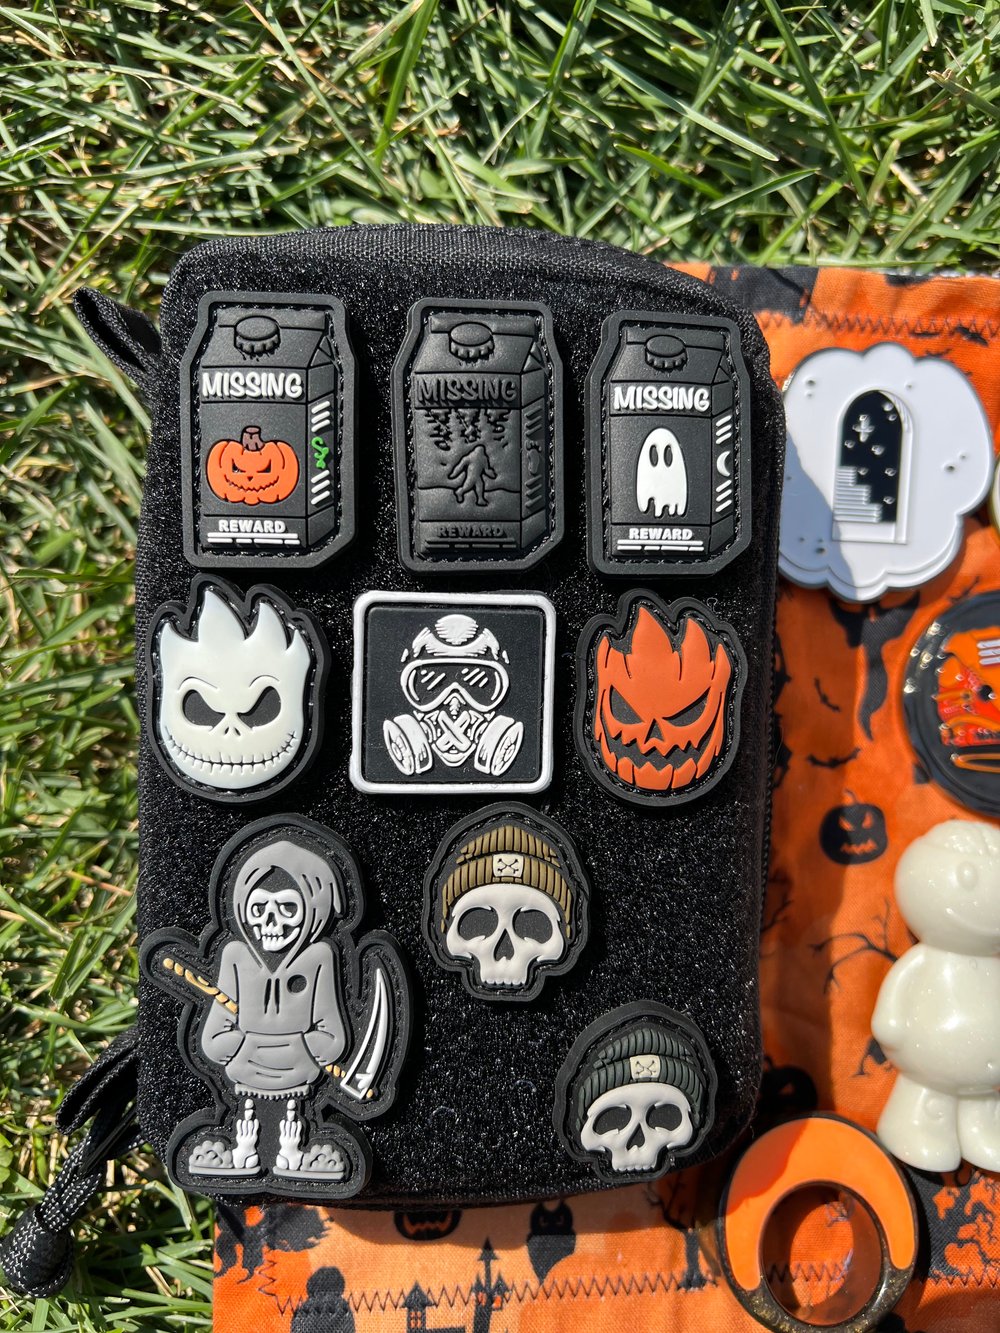 Halloween Cartons: The Pumpkin, The Ghost, and Bigfoot in the Dark!